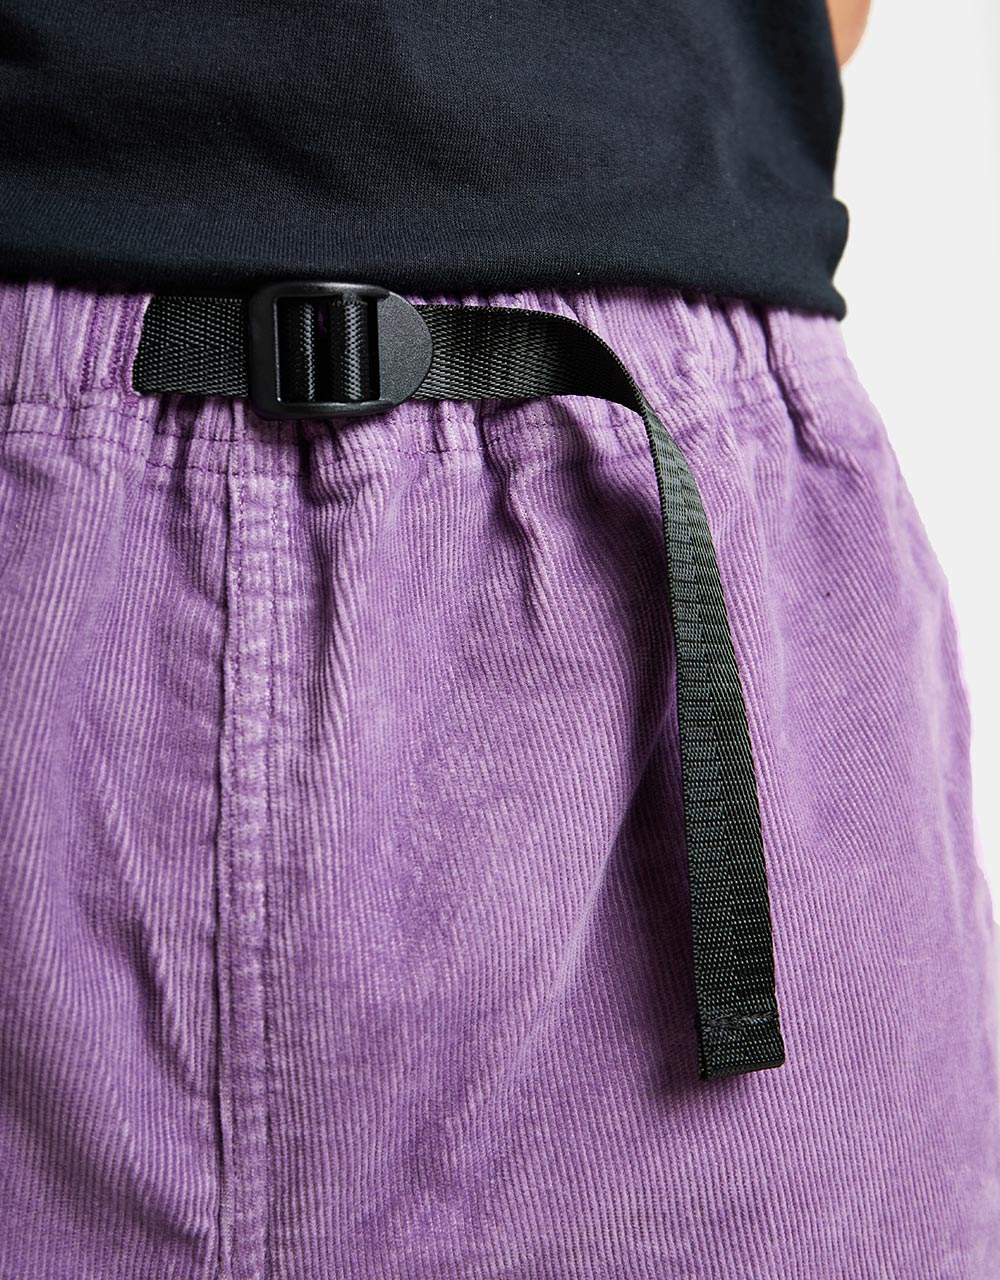 Levis Skateboarding Quick Release Pant - Chinese Violet